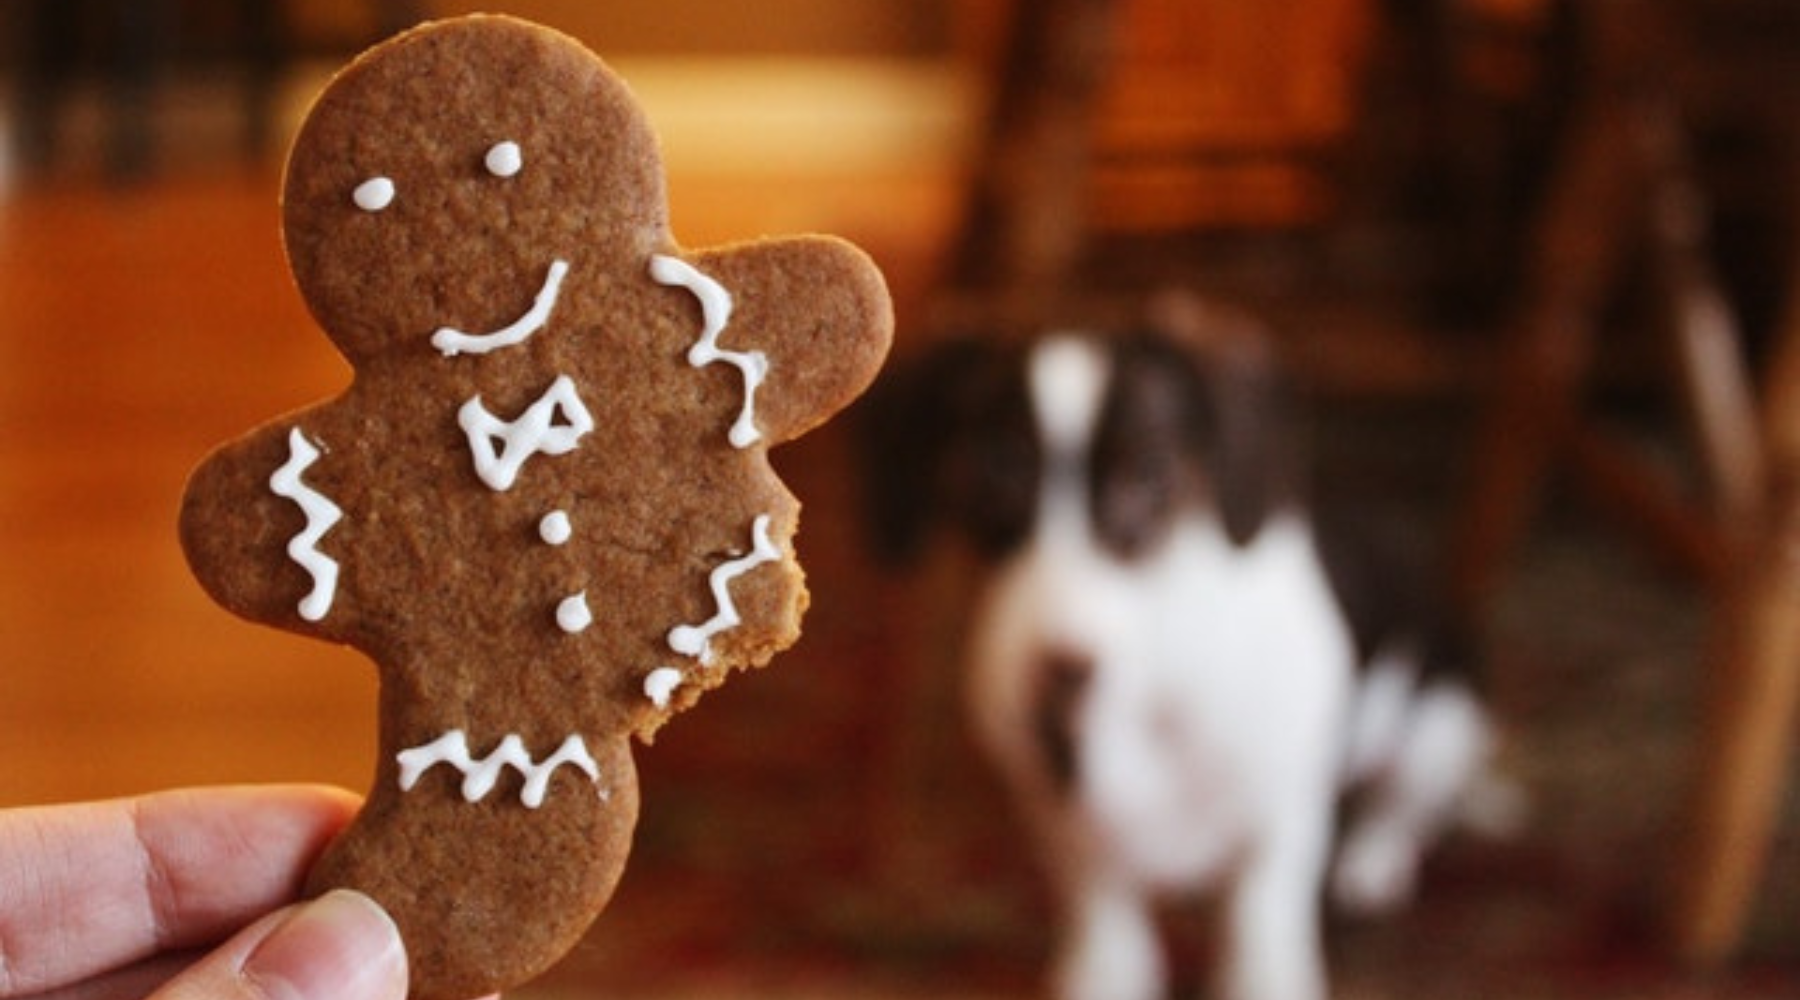 Dangers of Chocolate to Dogs